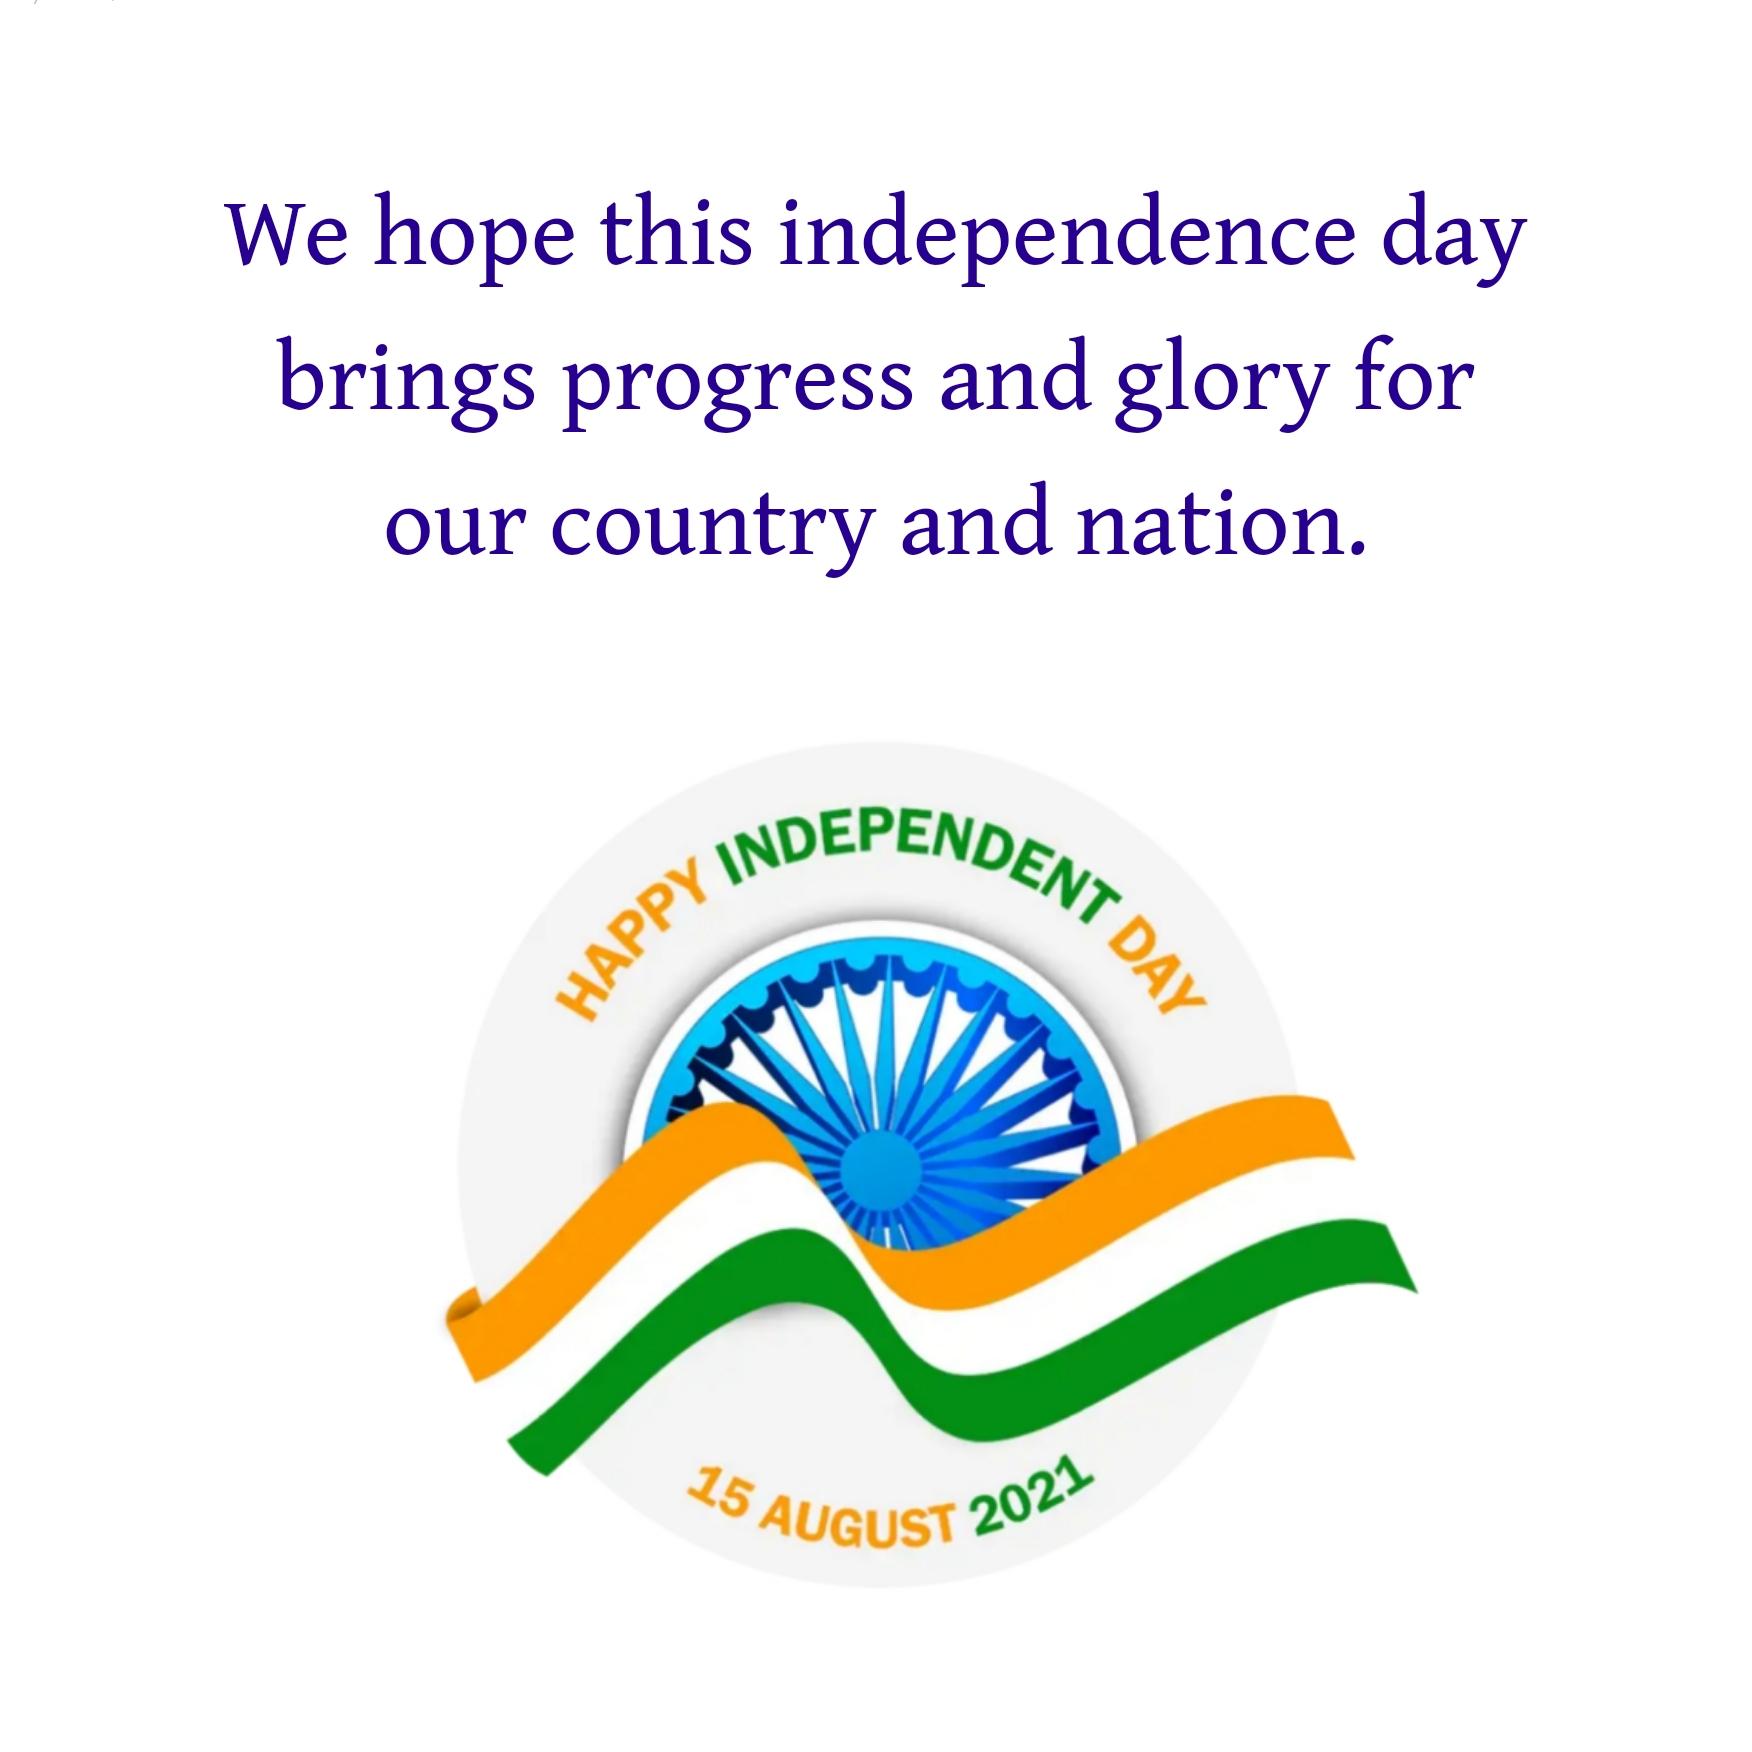 We hope this independence day brings progress and glory